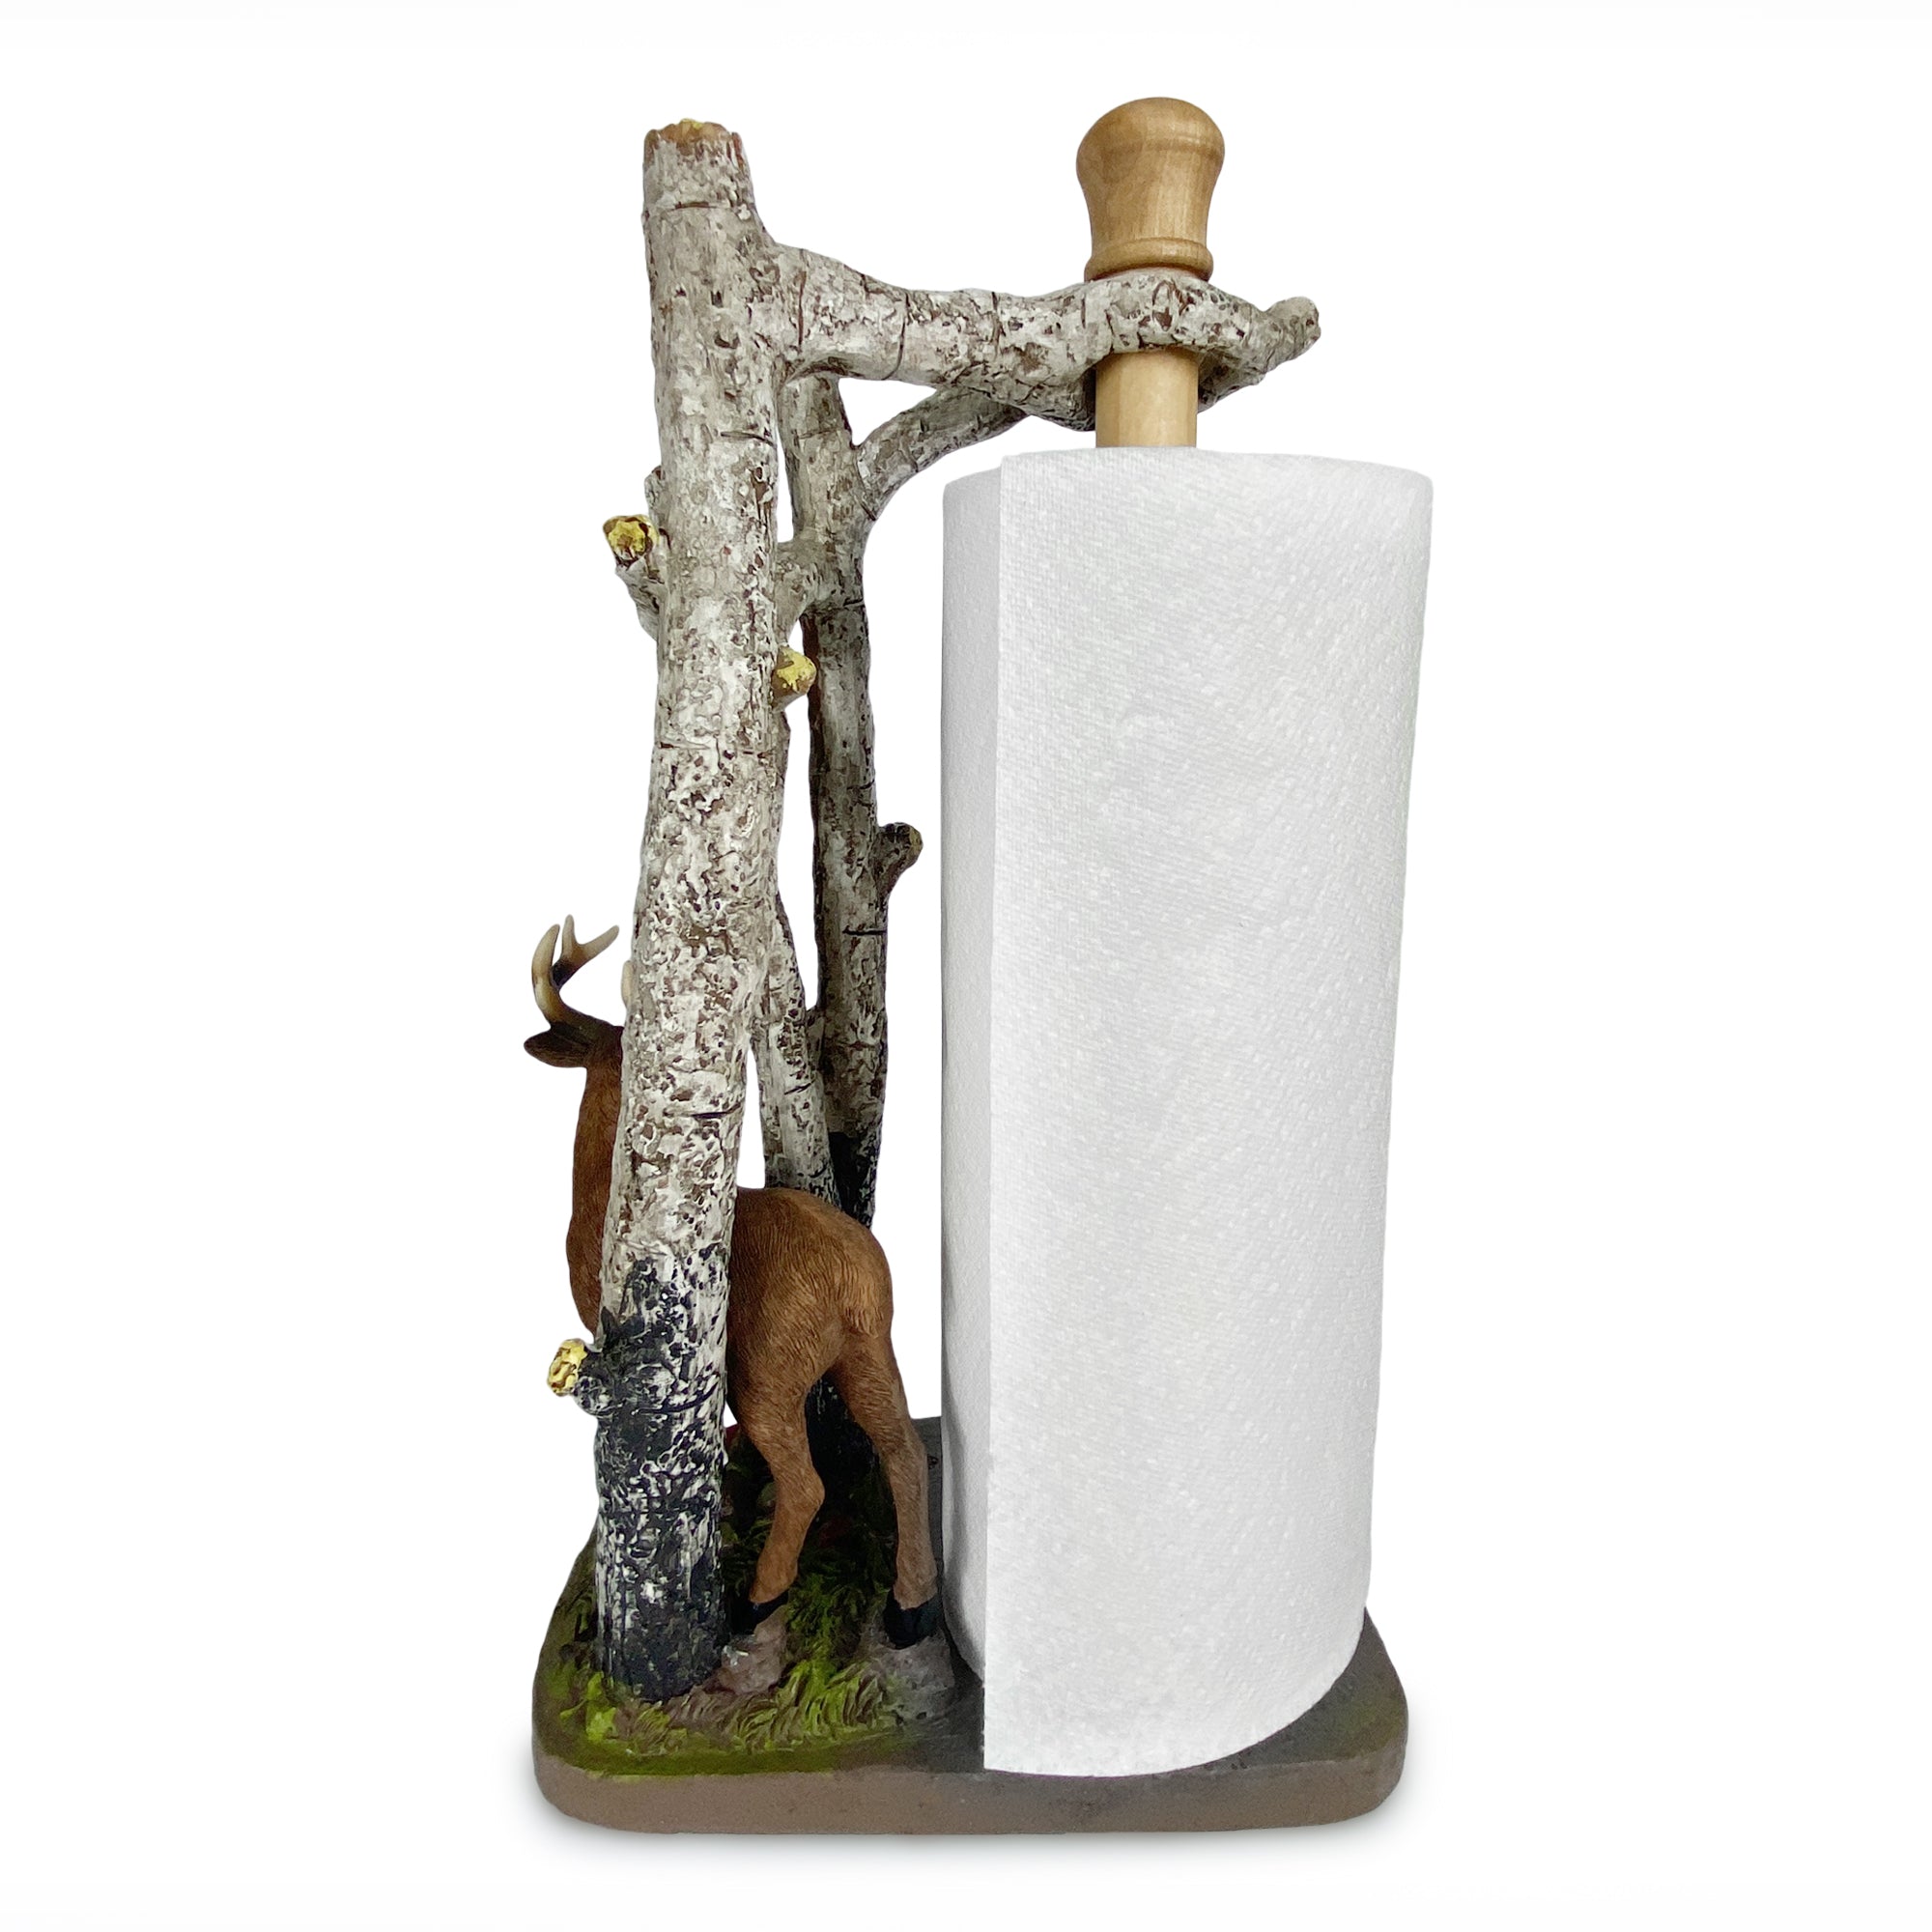 Rivers Edge Products Countertop Paper Towel Holder, Unique Resin and Wood  Paper Towel Holder, Novelty Napkin Roll Holder for Counter, Giftable Animal  Paper Towel Stand, Moose 